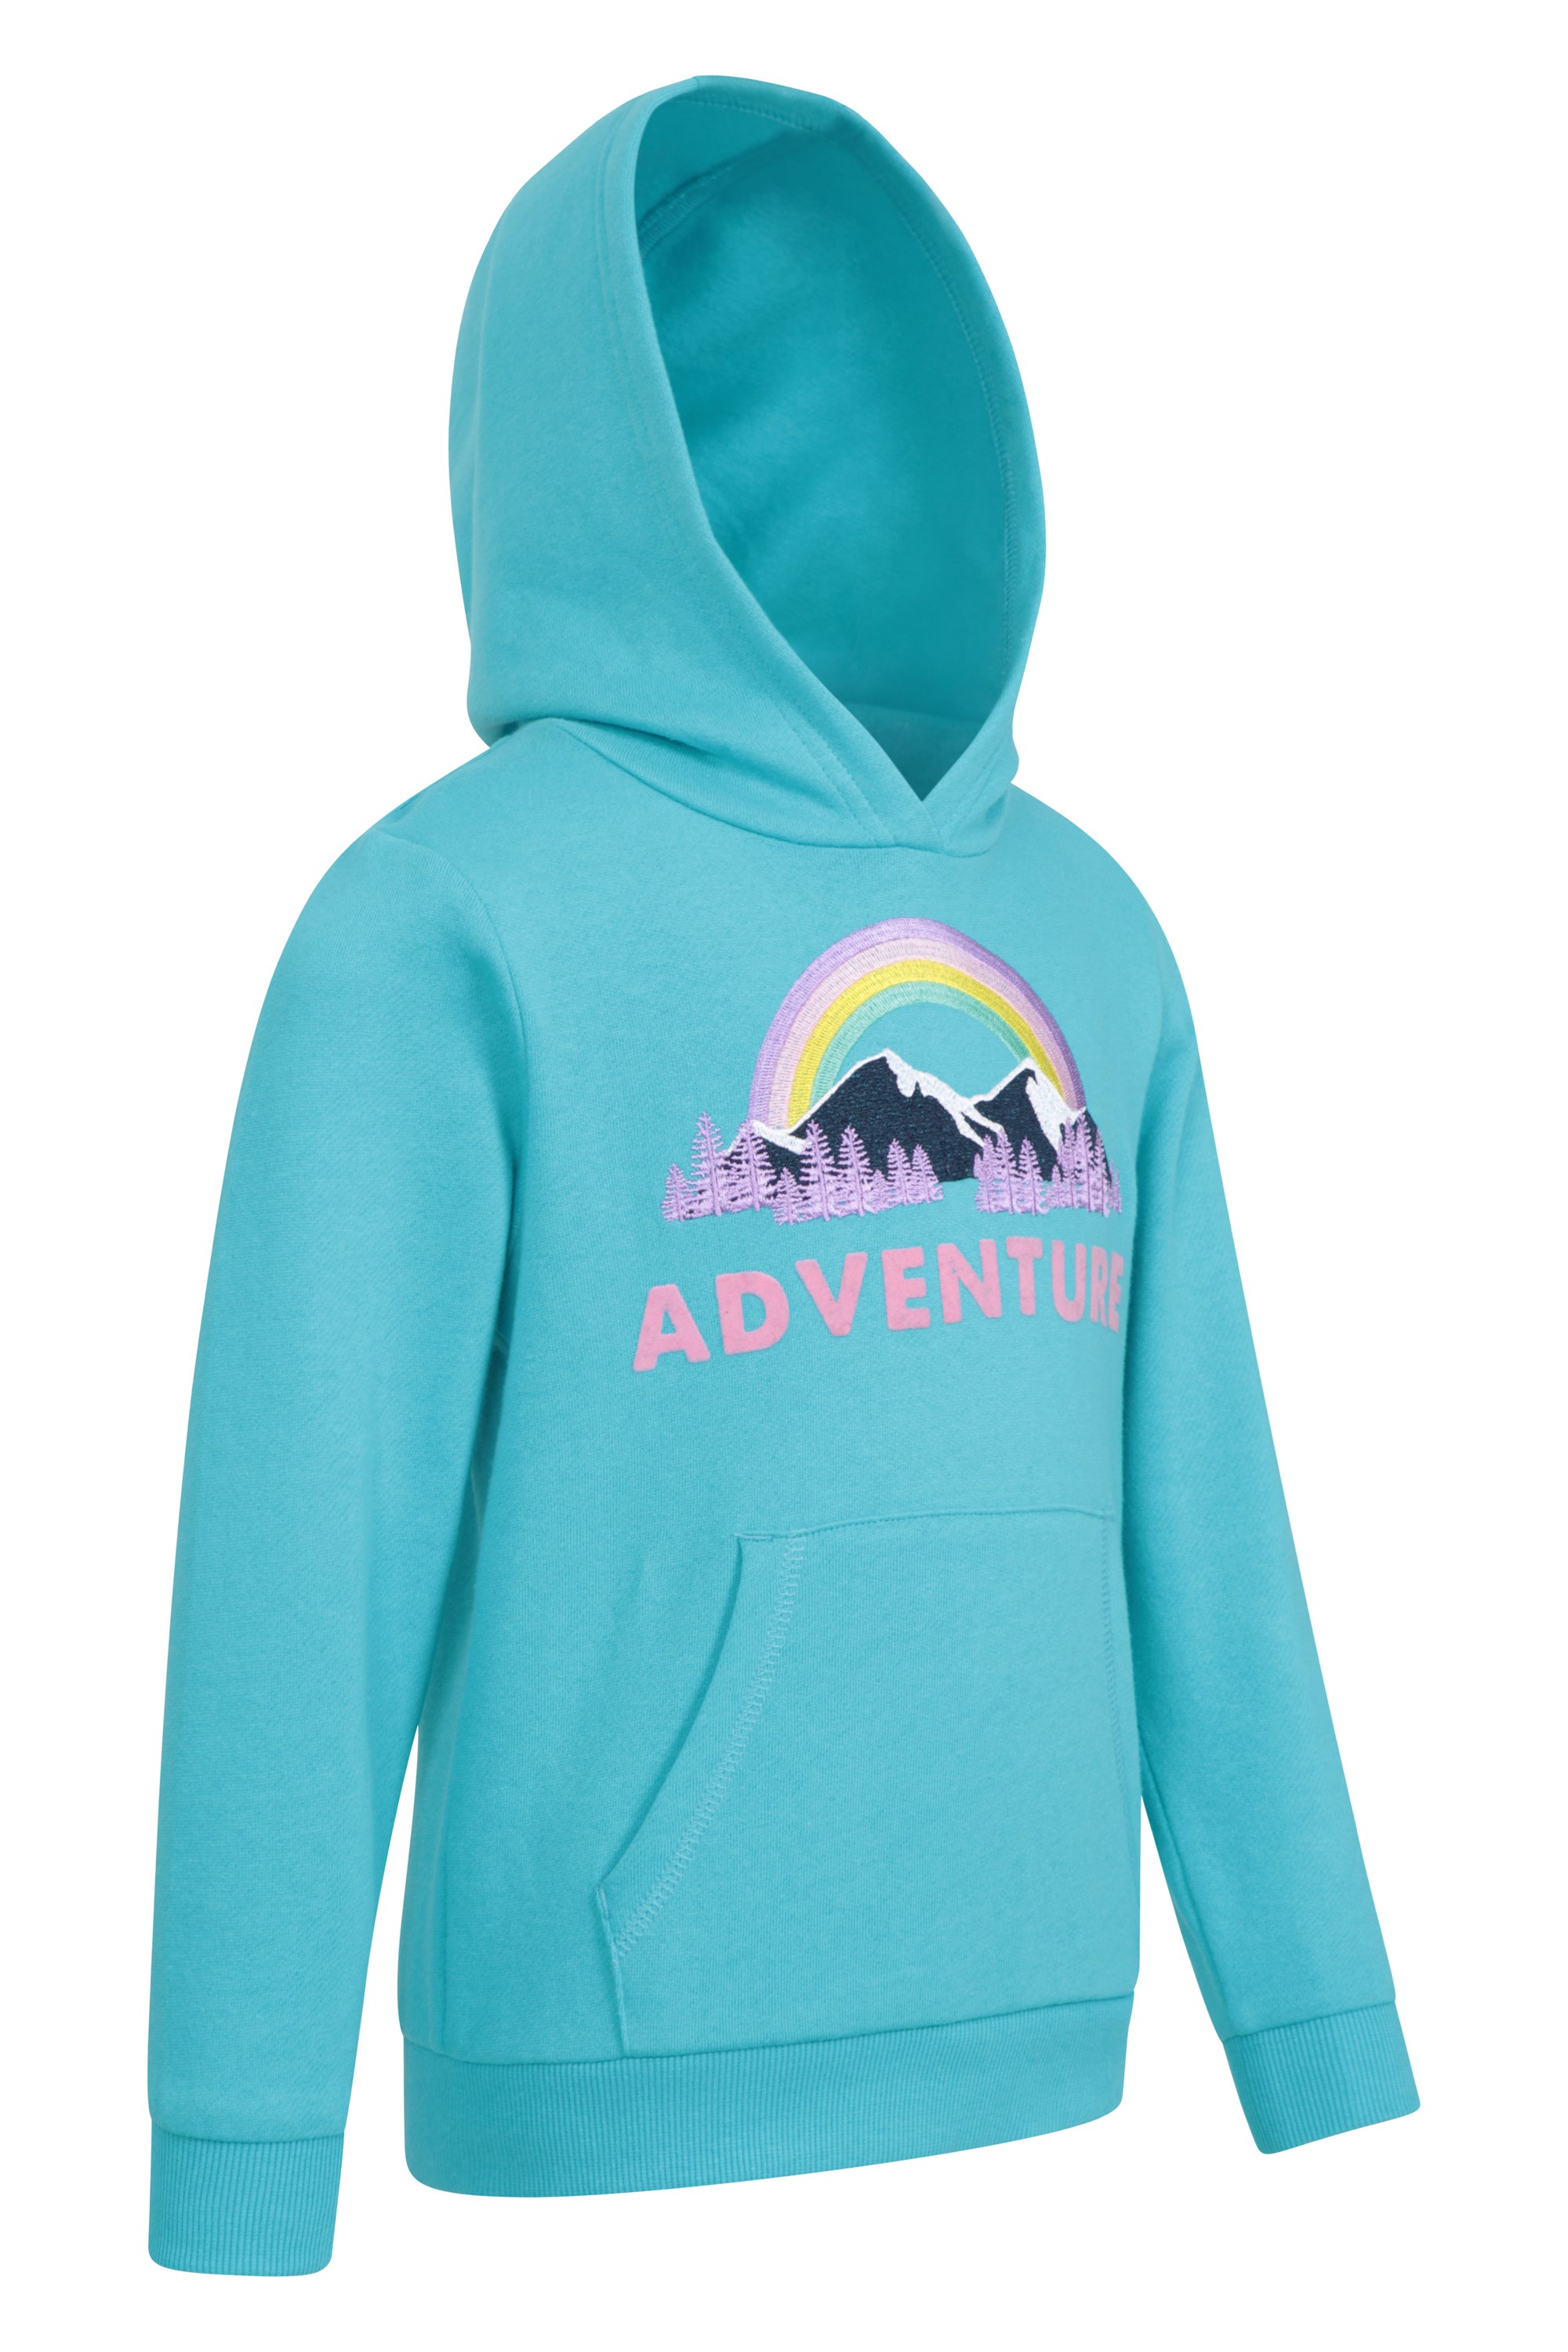 Lightweight & Breathable Easy Care Sweatshirt with Summer & Outdoors Marque : Mountain WarehouseMountain Warehouse Bloom Embroidered Kids Hoodie Best for Spring for Boys & Girls 